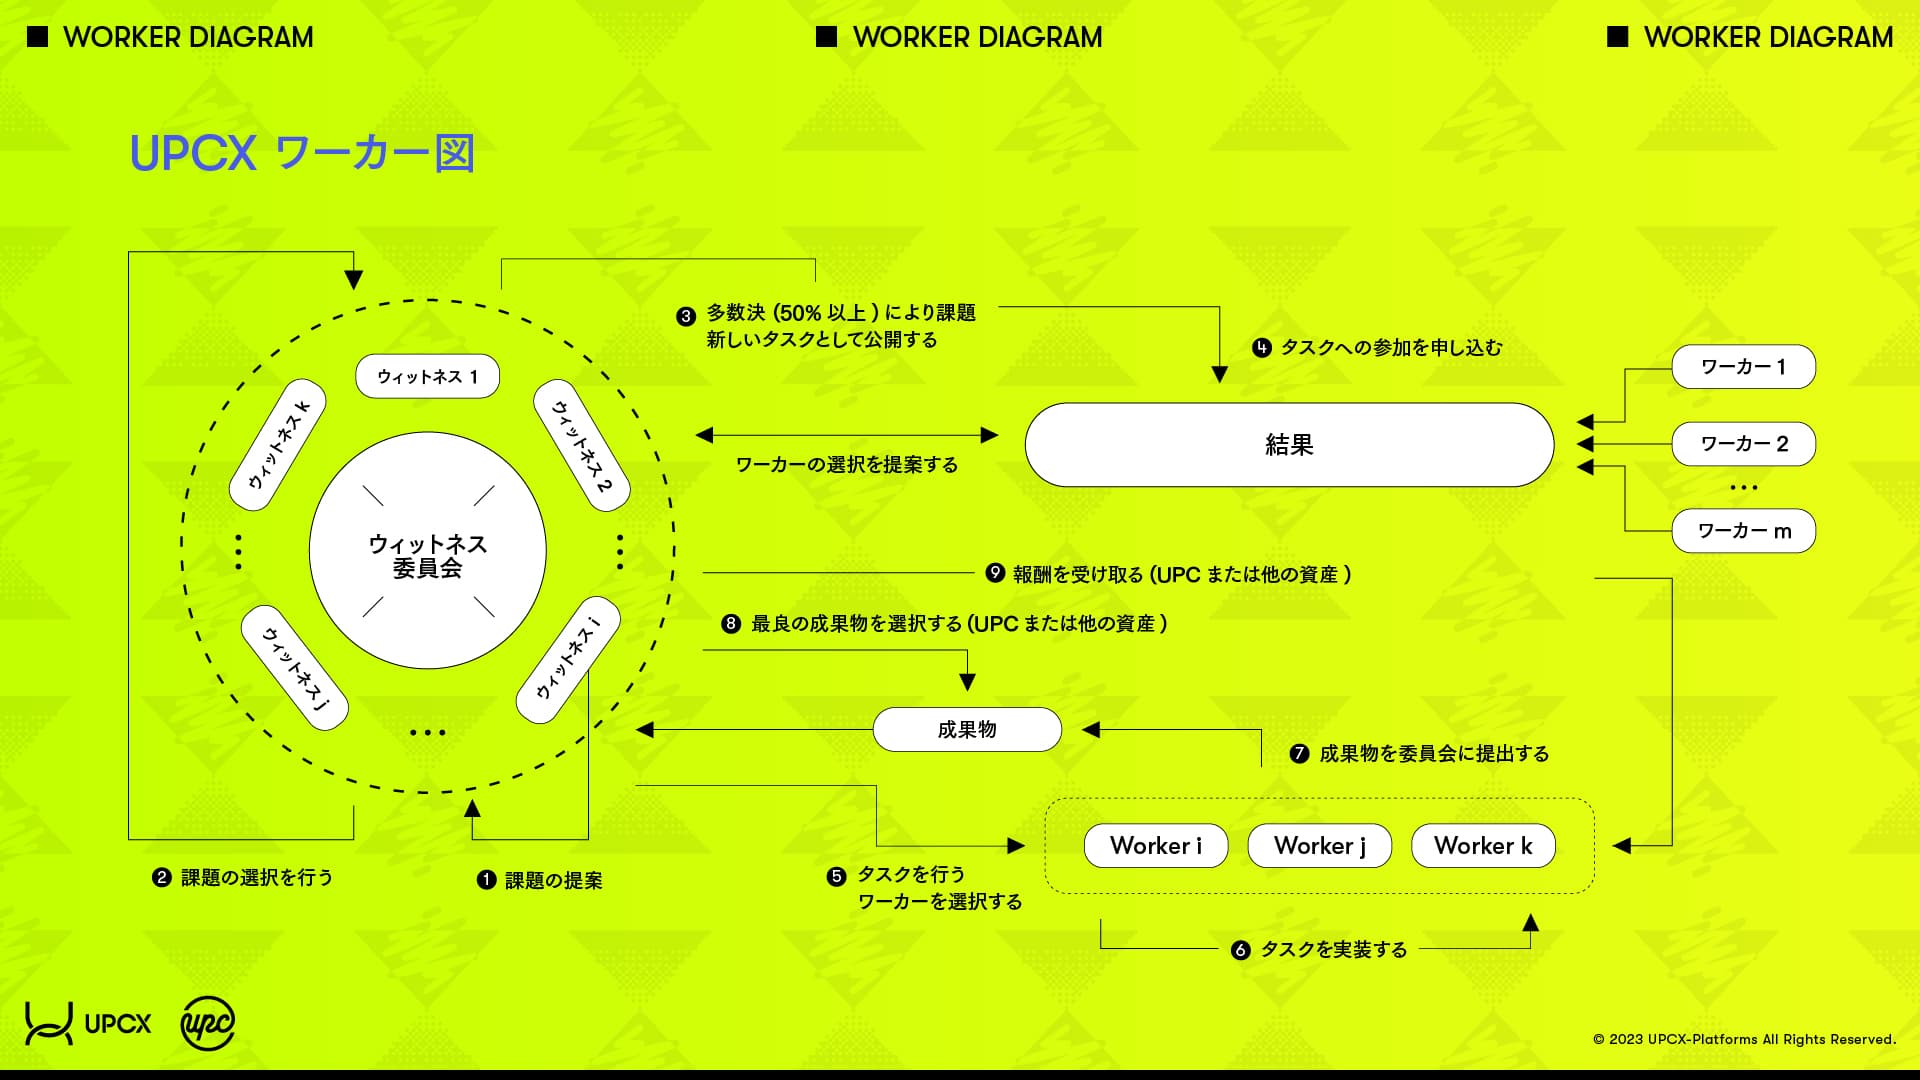 UPCX Worker Diagram